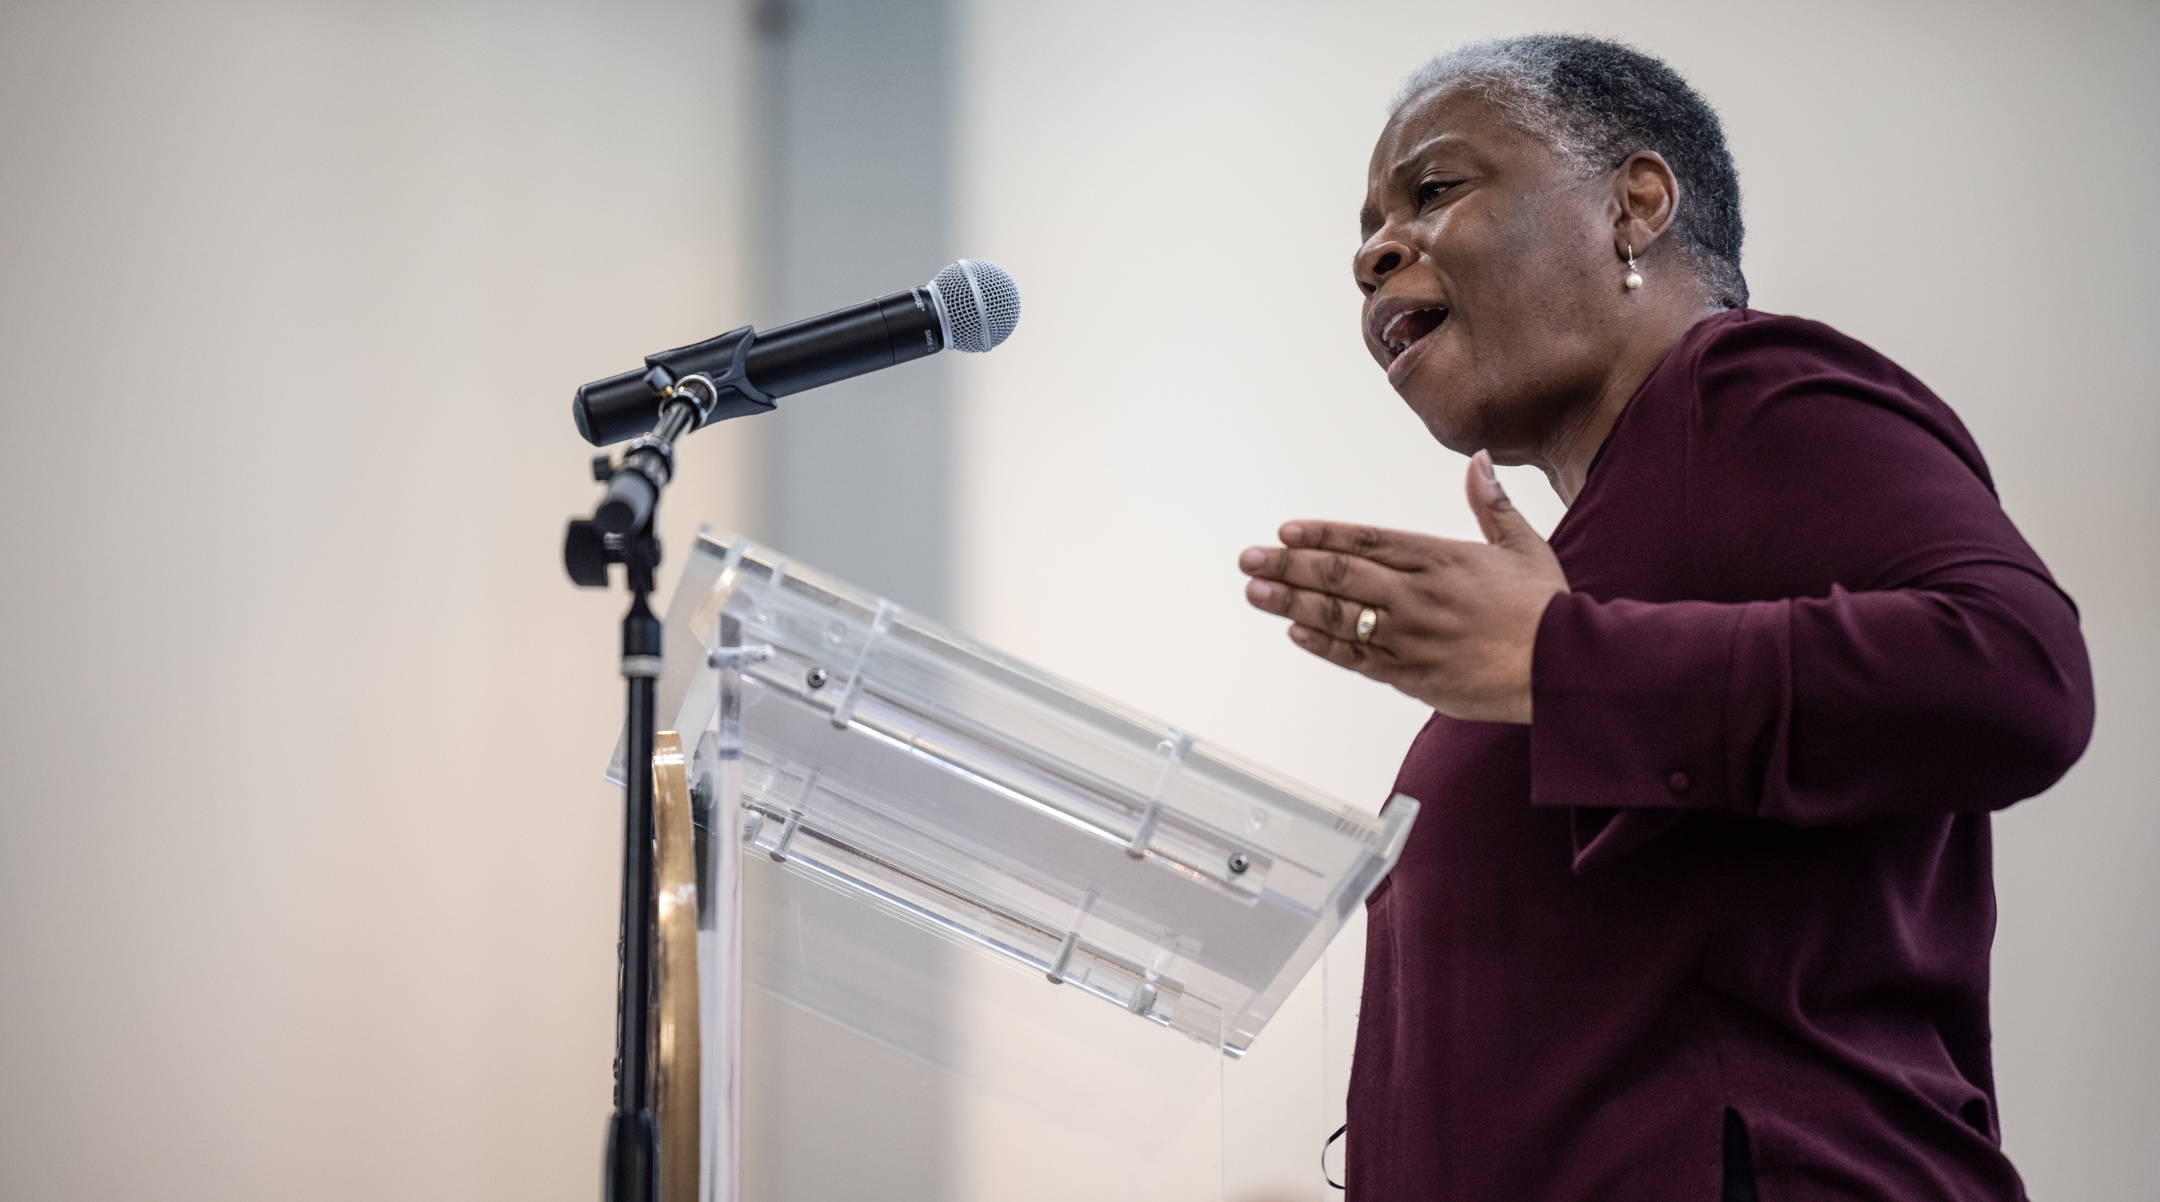 State Rep. Pamela Stevenson (D-KY) speaks at the Center for African American Heritage before a bill signing event in Louisville, Kentucky, April 9, 2021. (Jon Cherry/Getty Images)